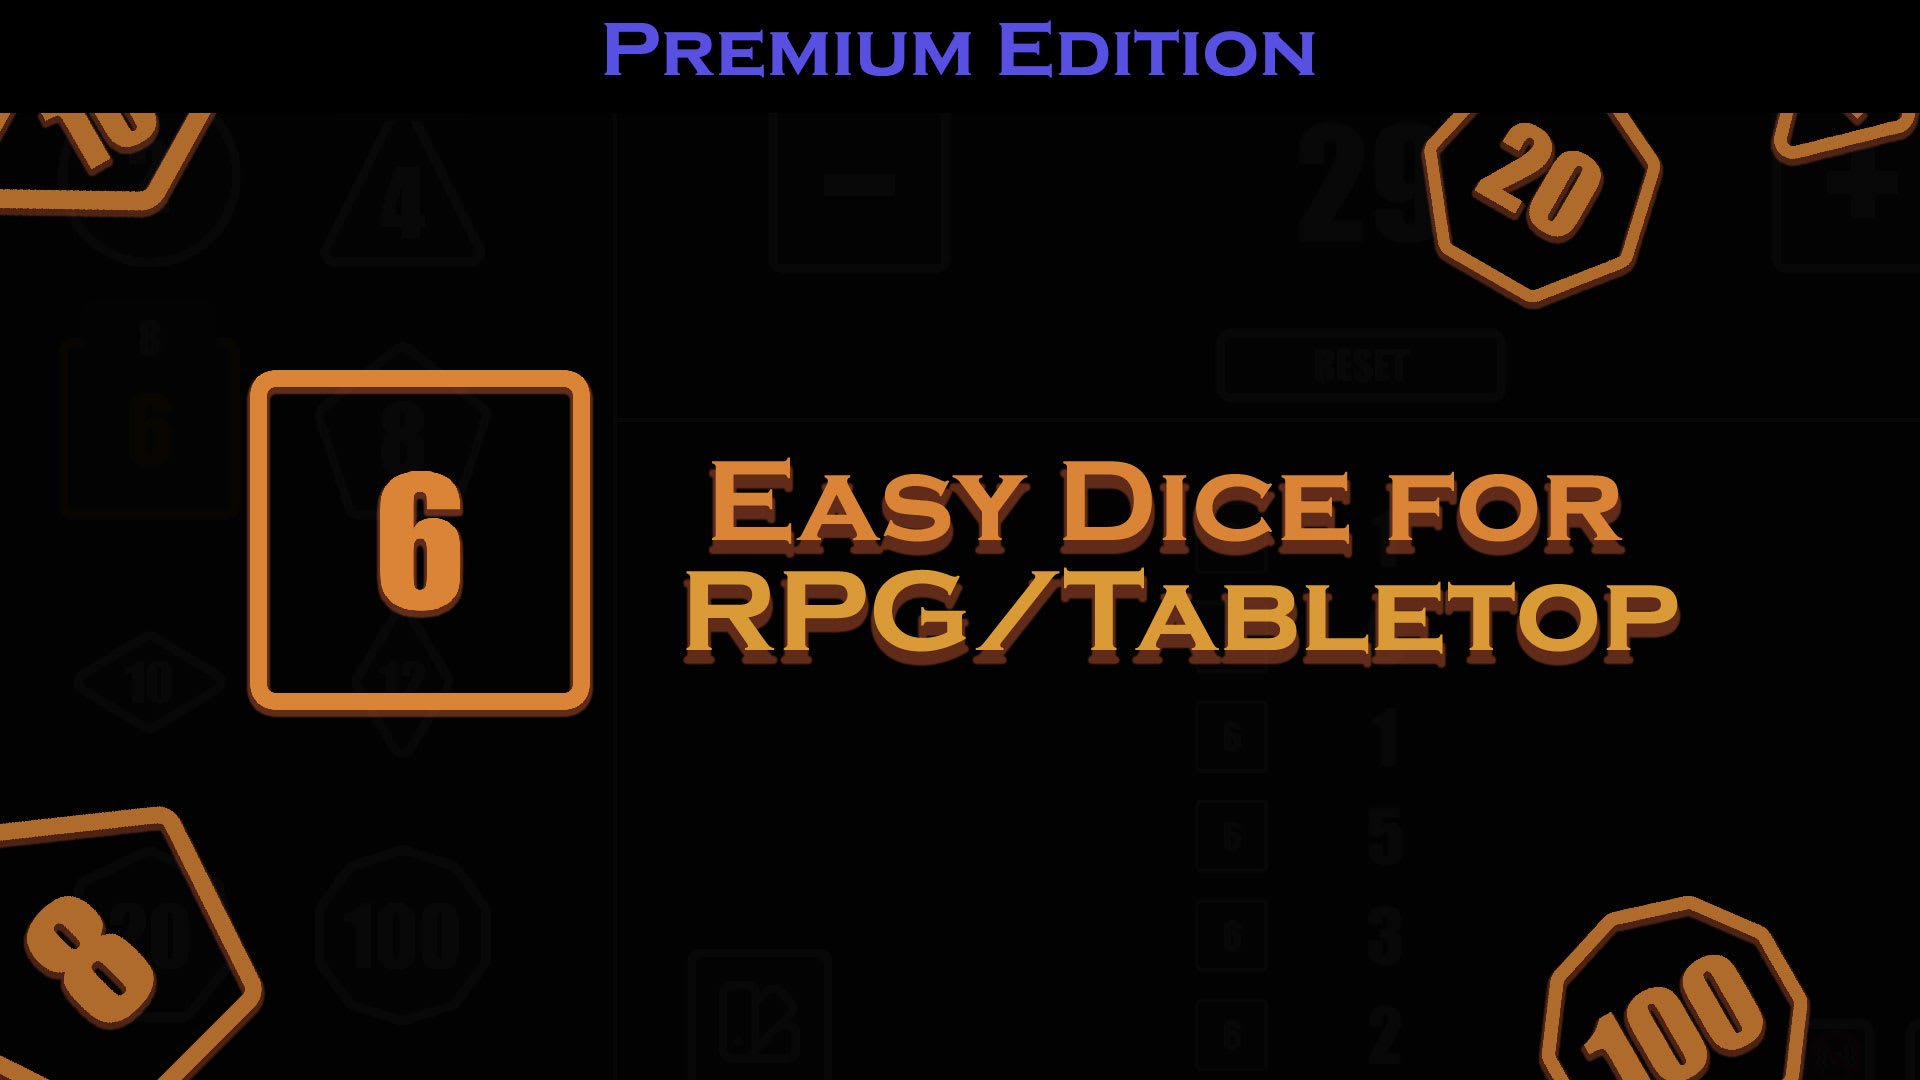 Easy Dice for RPG/Tabletop - Premium Edition 1